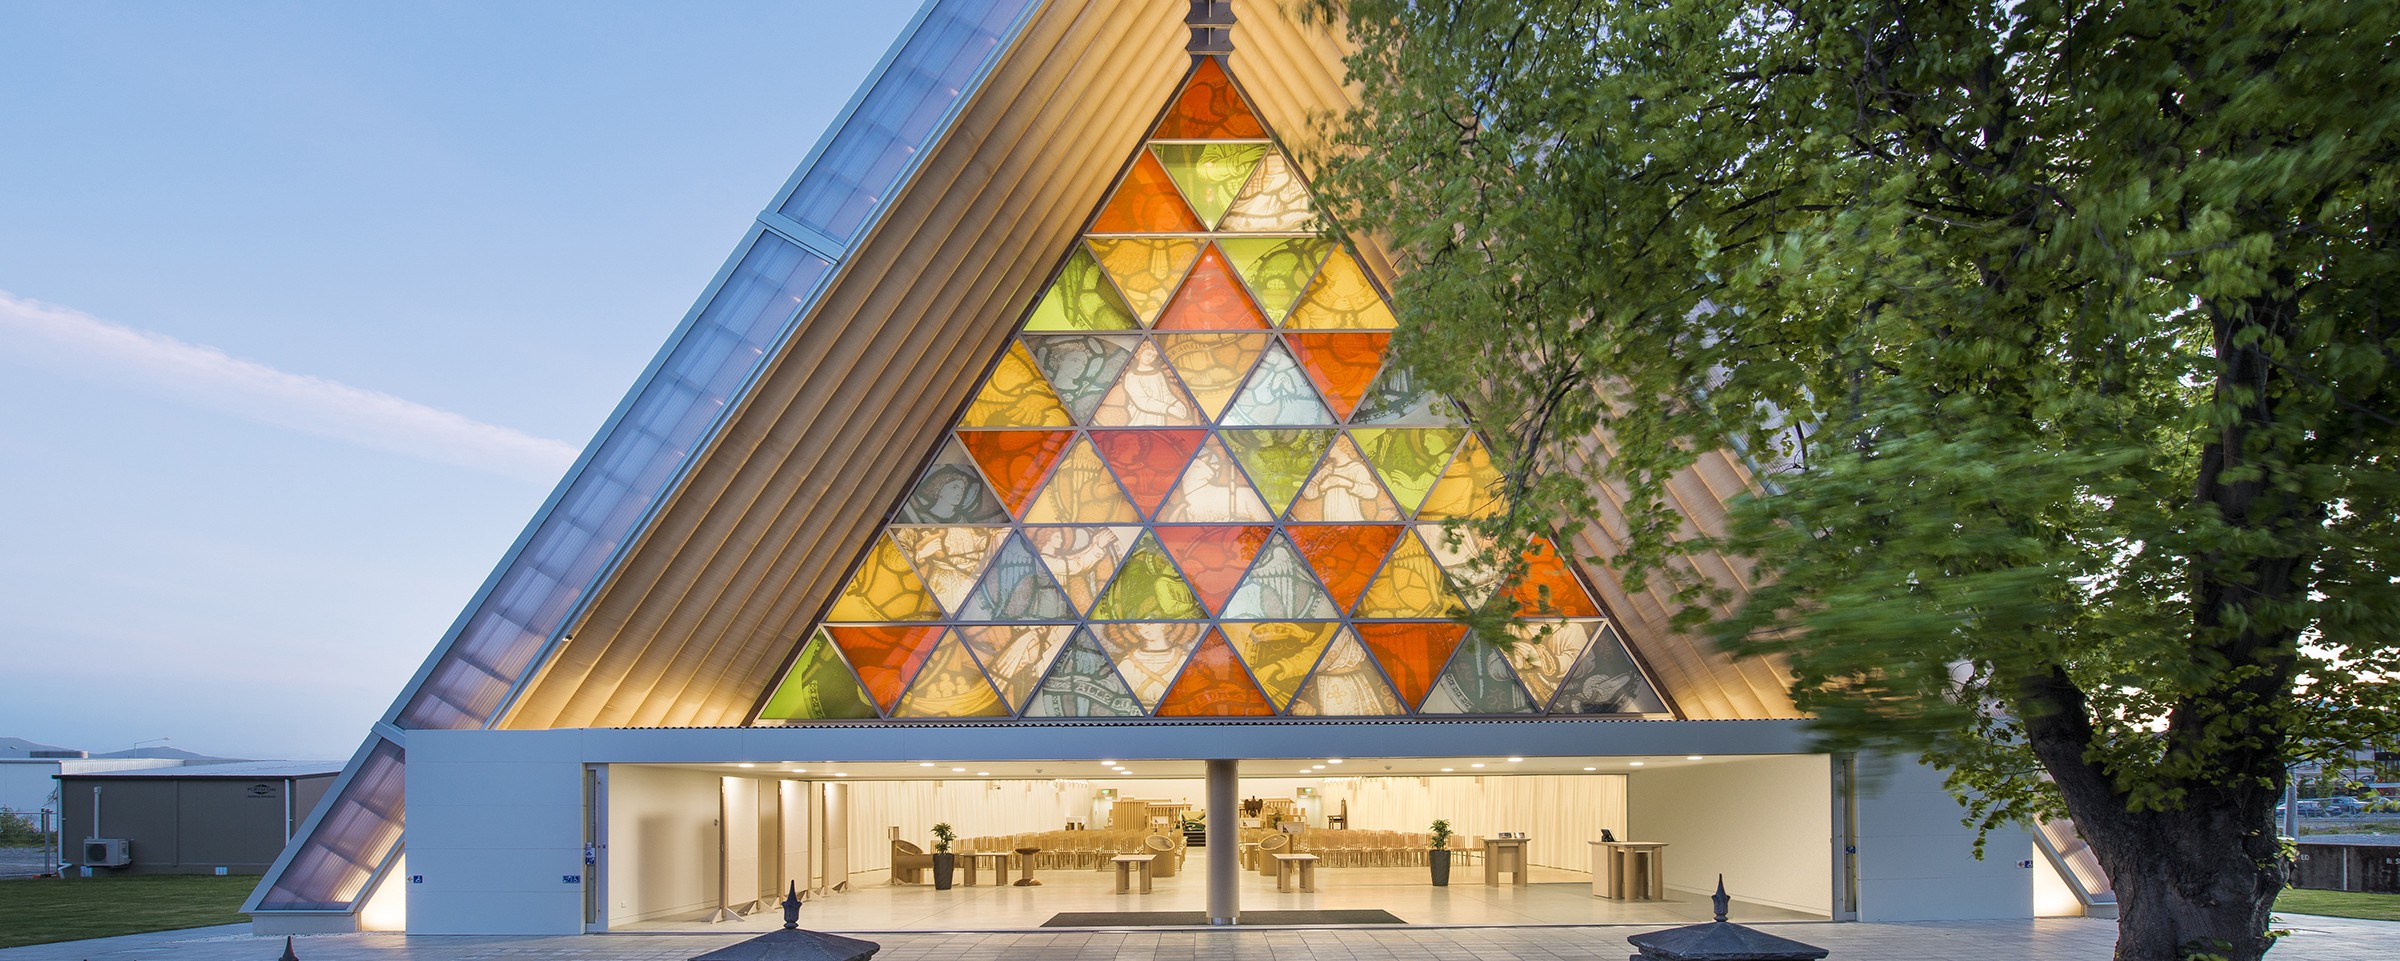 The Cardboard Cathedral in Christchurch, NZ. A triangular building with a large wall of stained glass.